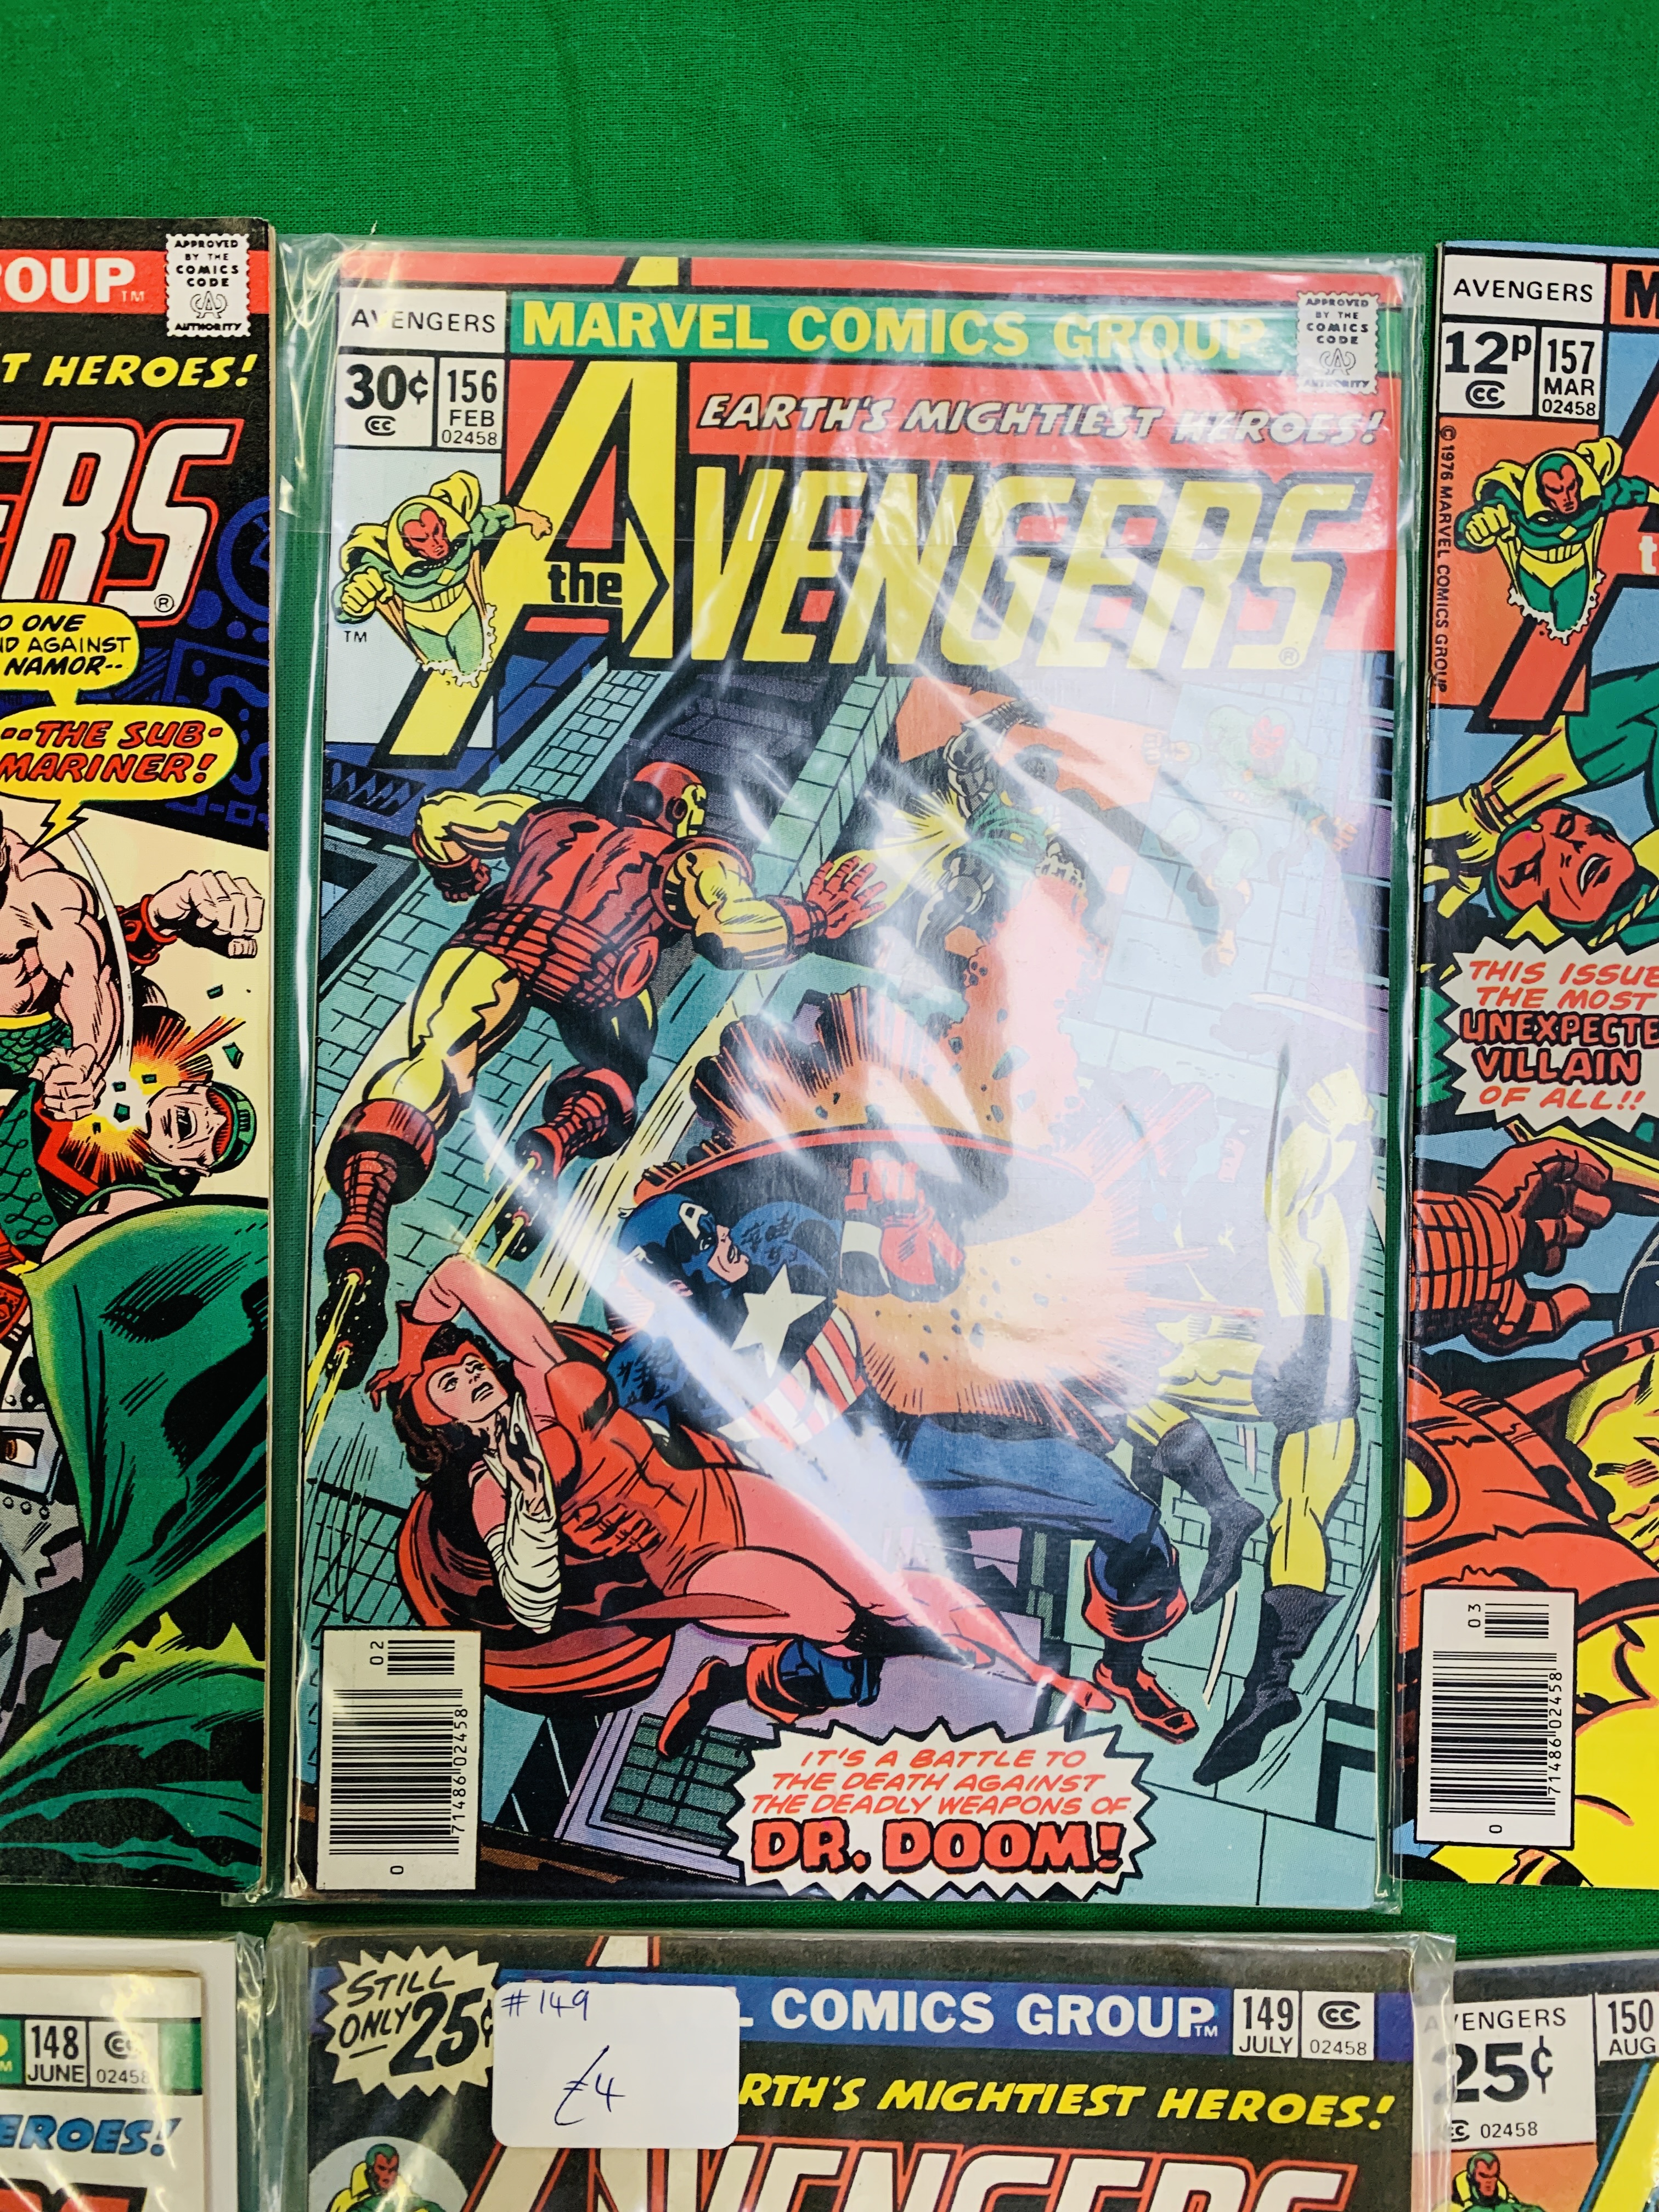 MARVEL COMICS THE AVENGERS NO. 101 - 299, MISSING ISSUES 103 AND 110. - Image 42 of 130